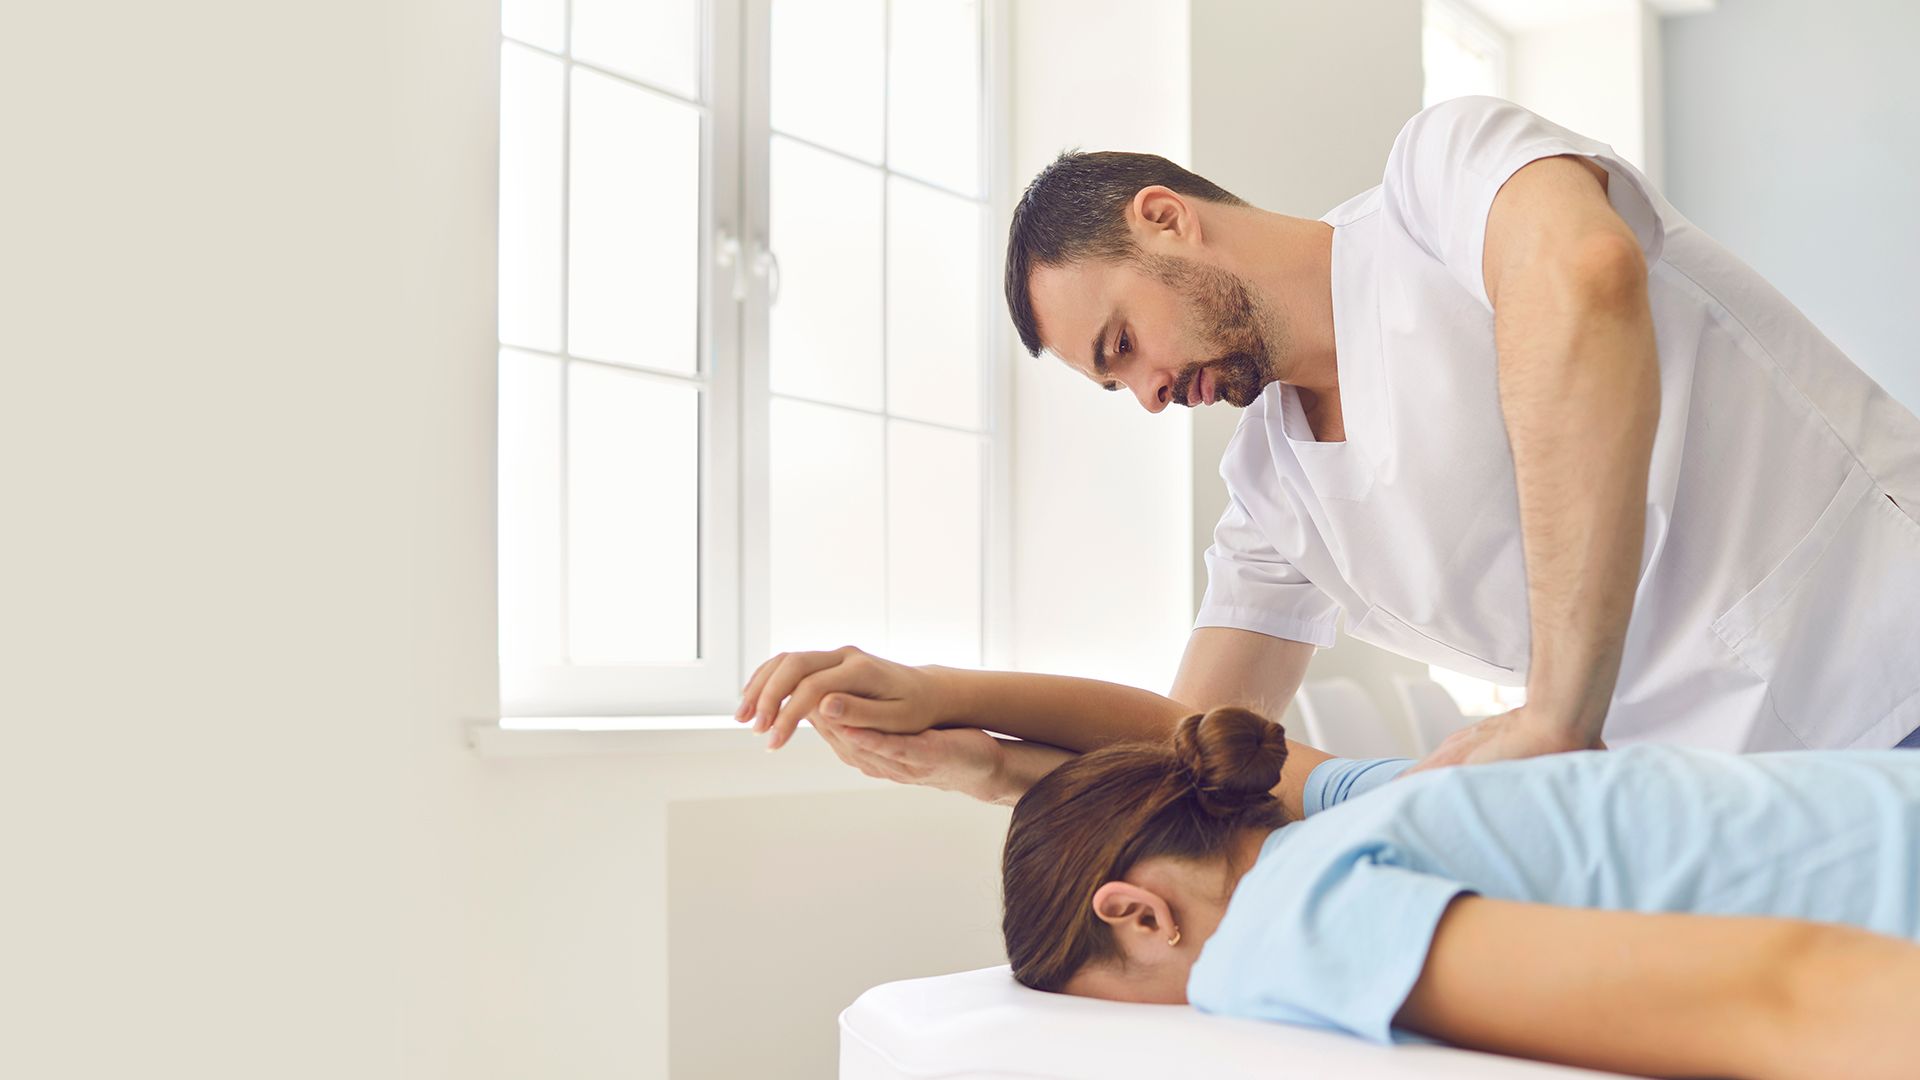 Should I Go to a Chiropractor? Uncovering Benefits and Risks